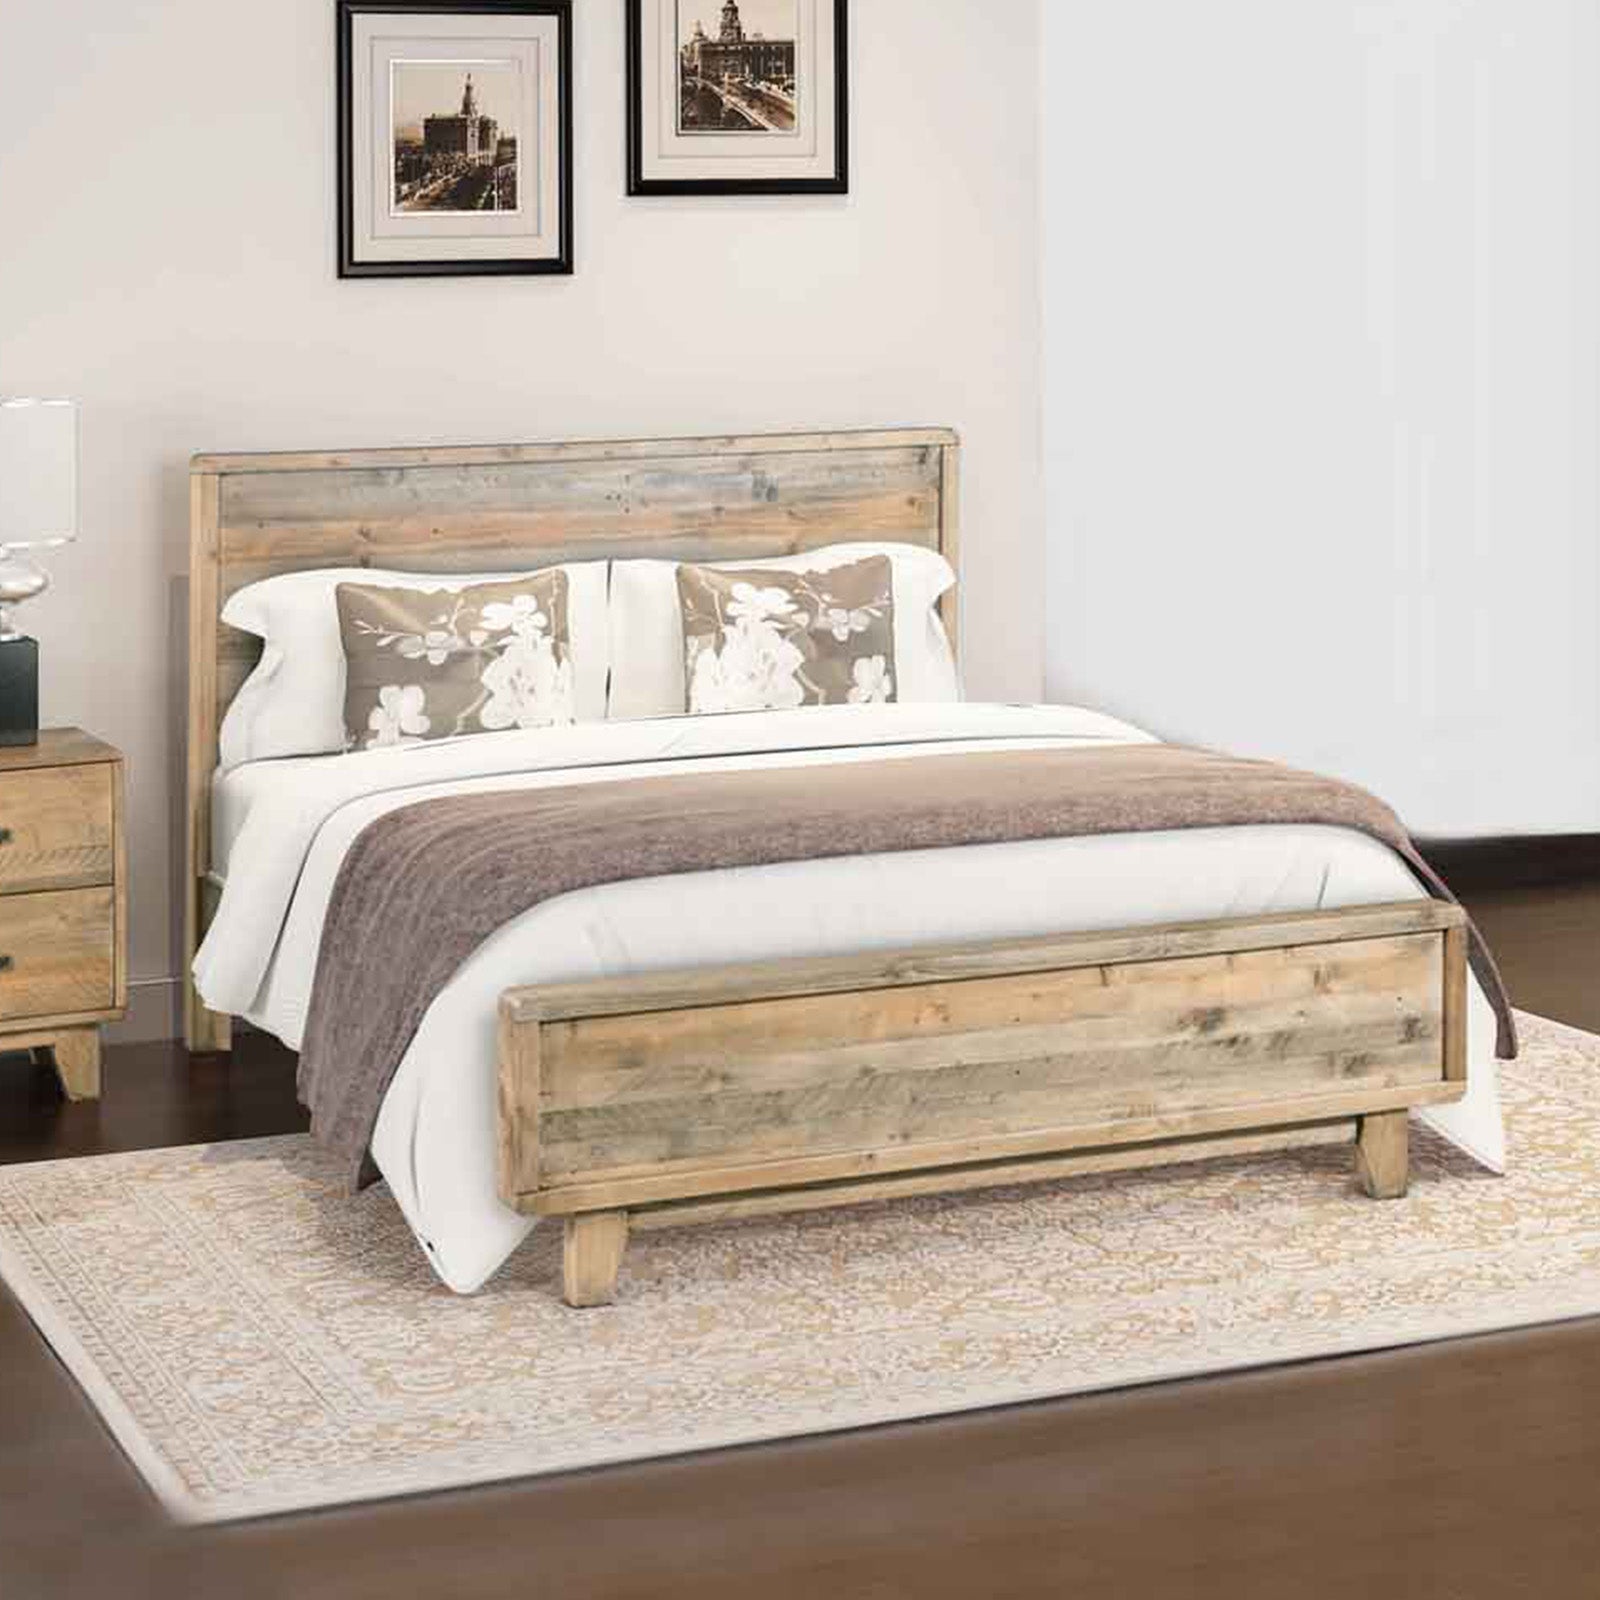 King Size Wooden Bed Frame in Solid Wood Antique Design Light Brown - SILBERSHELL